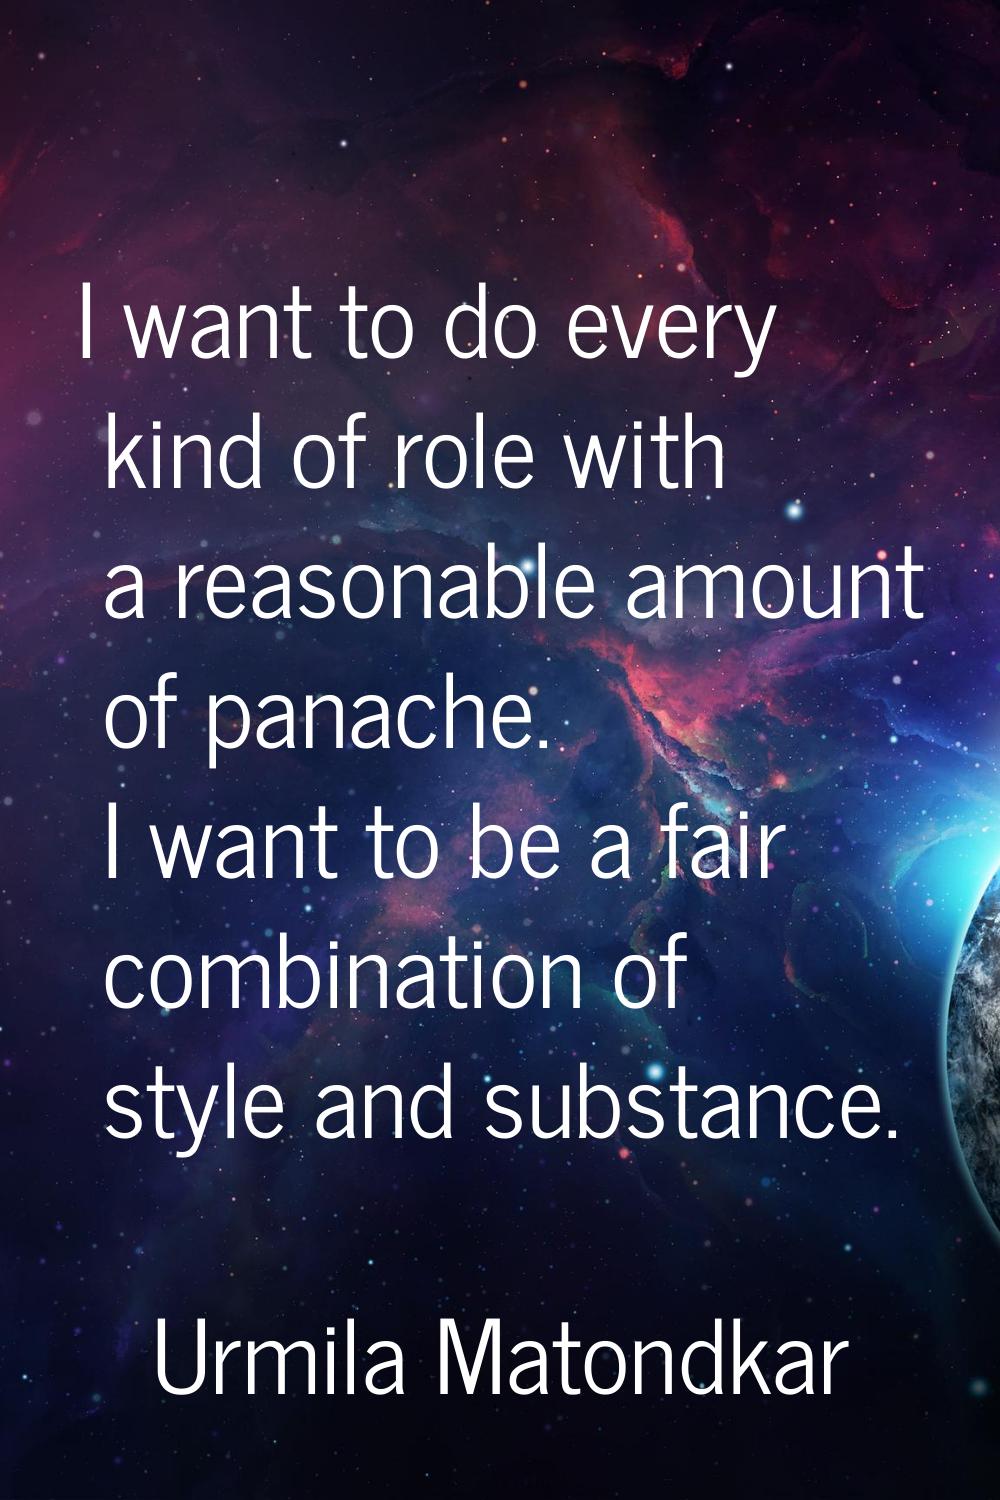 I want to do every kind of role with a reasonable amount of panache. I want to be a fair combinatio